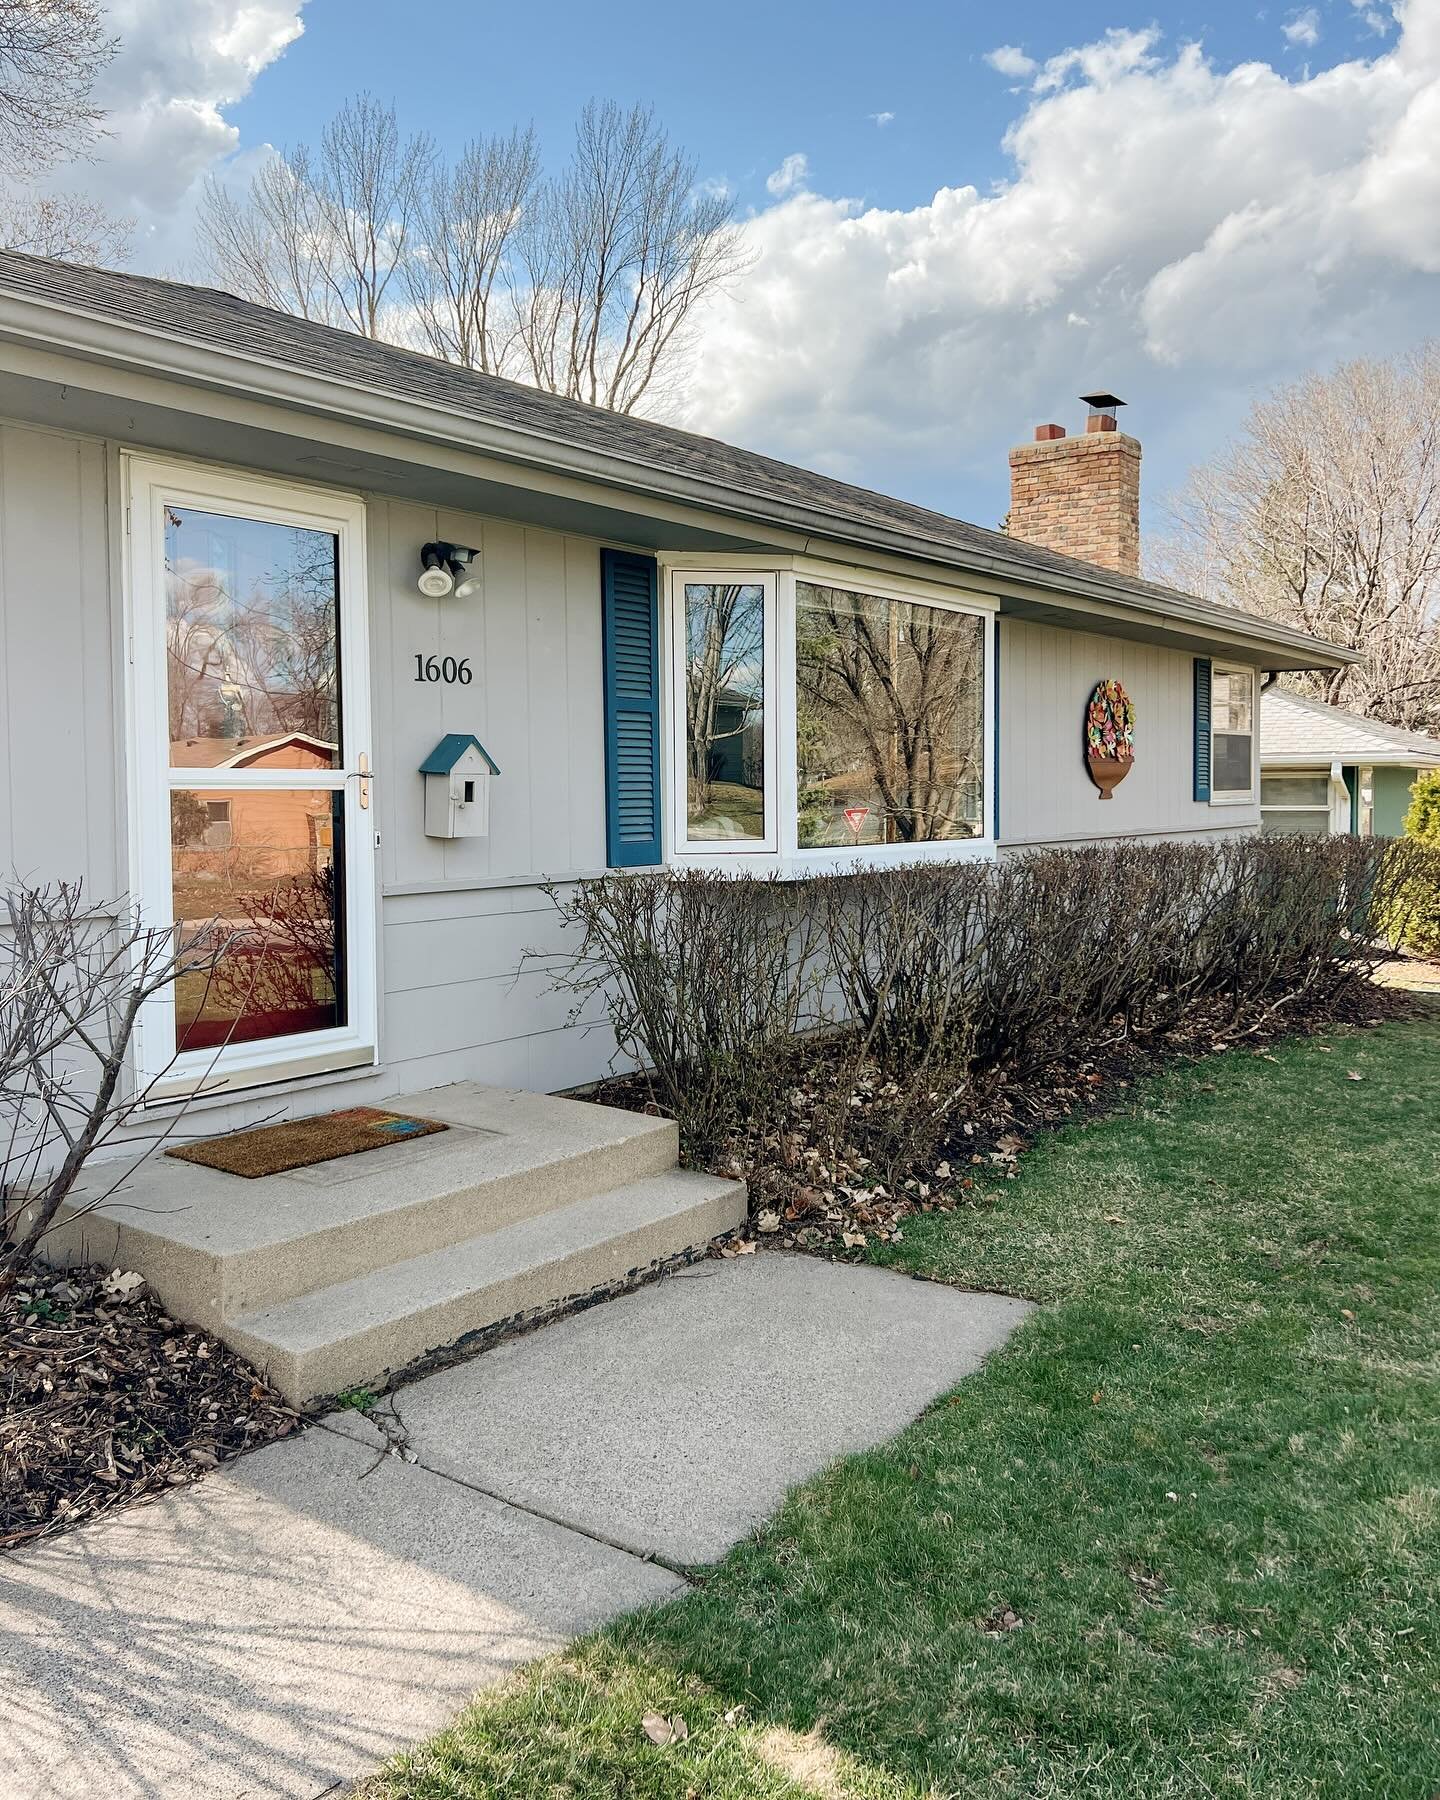 ✨New Listing✨

This charming little St. Louis Park rambler hits the market tomorrow (4/11). Hardwood floors, 3 bedrooms on one level, updated kitchen and a two car garage. Cozy fireplace in the basement with room to add a 4th bedroom.

If you&rsquo;r